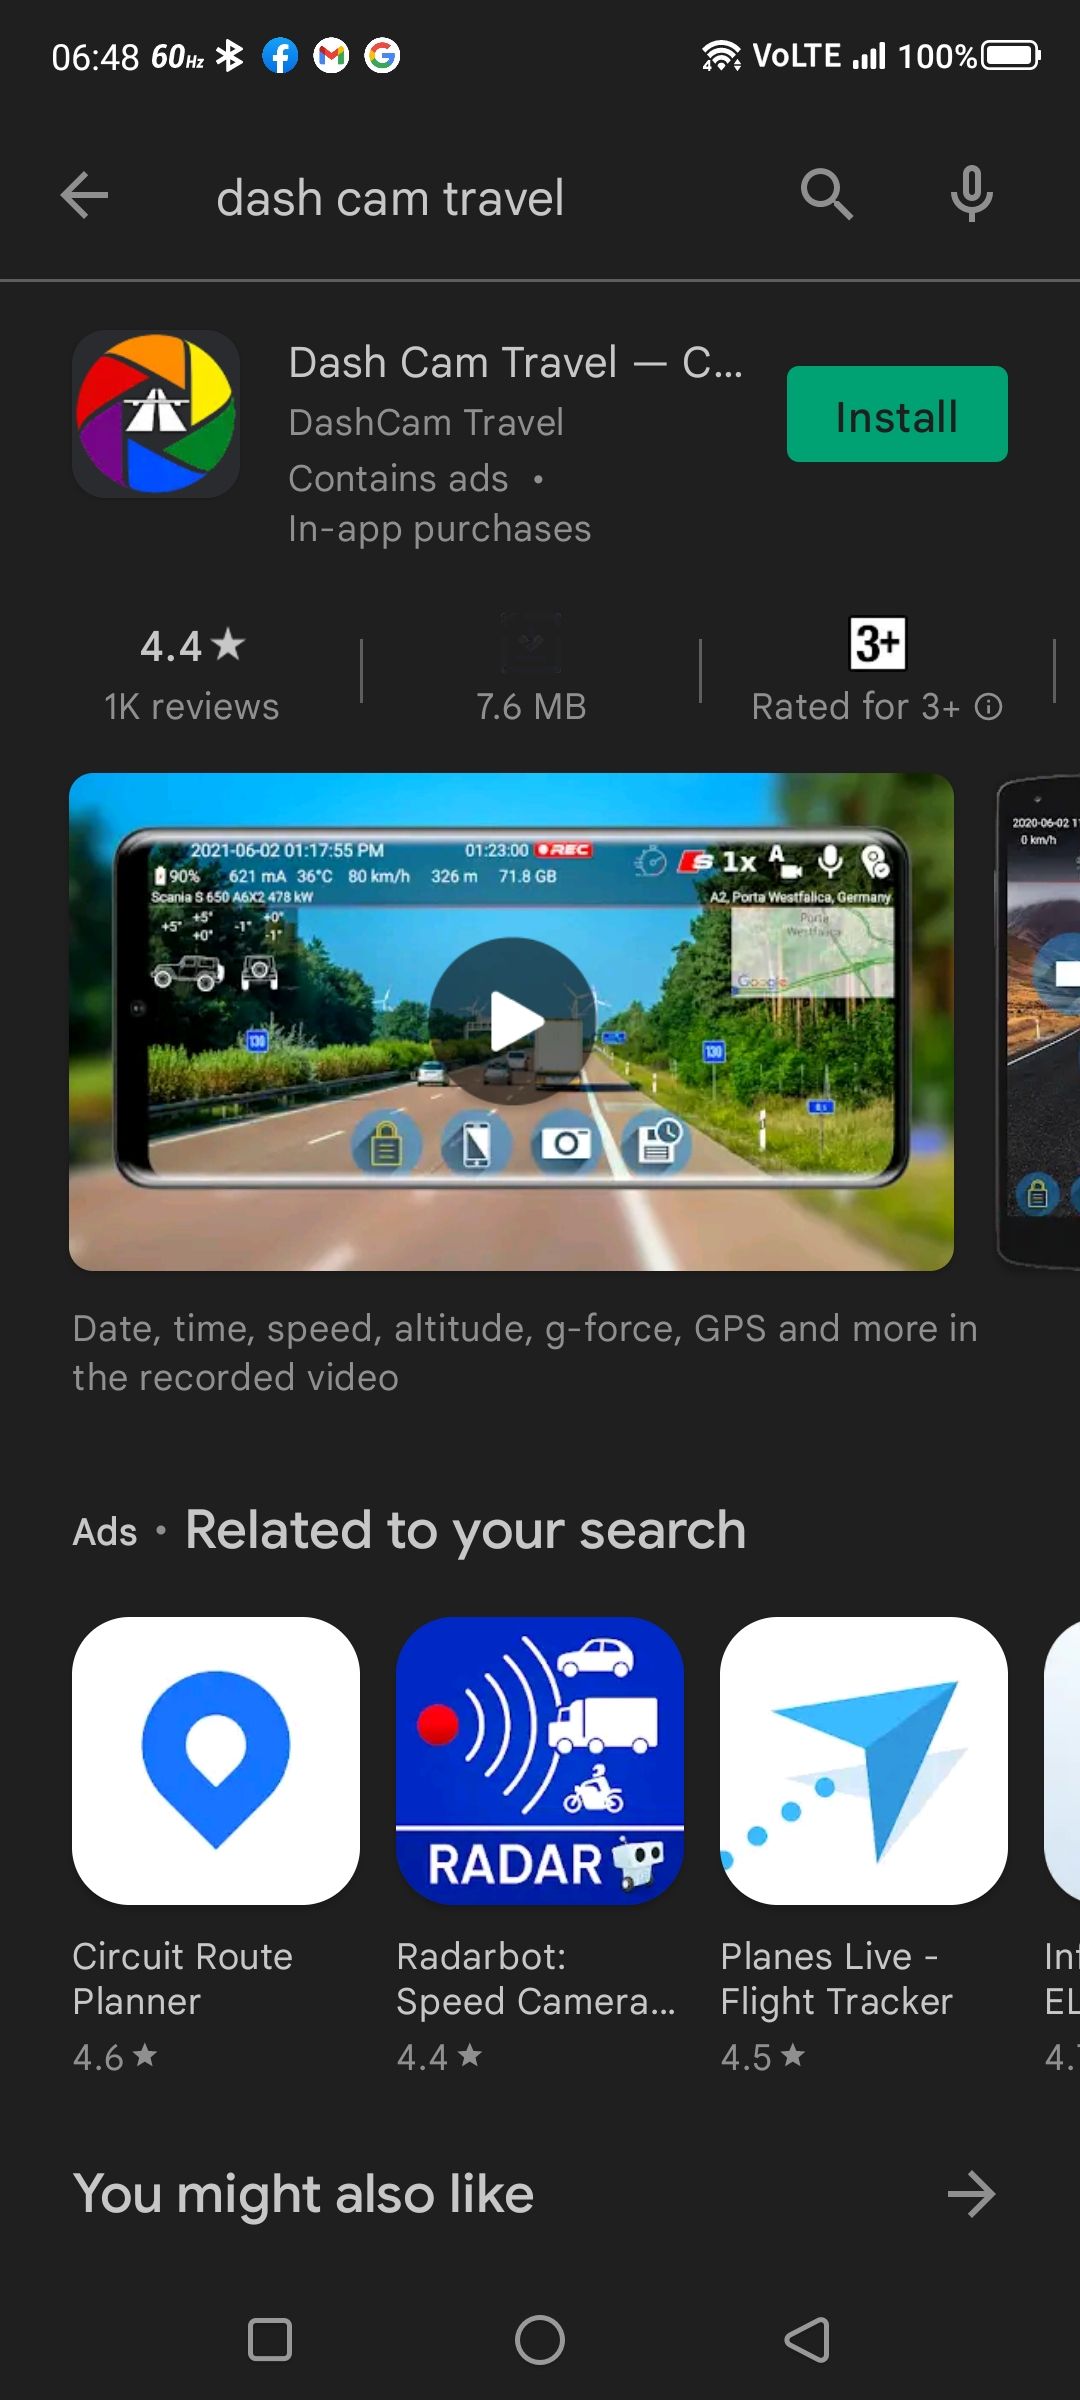 Dash Cam Travel app on Play Store